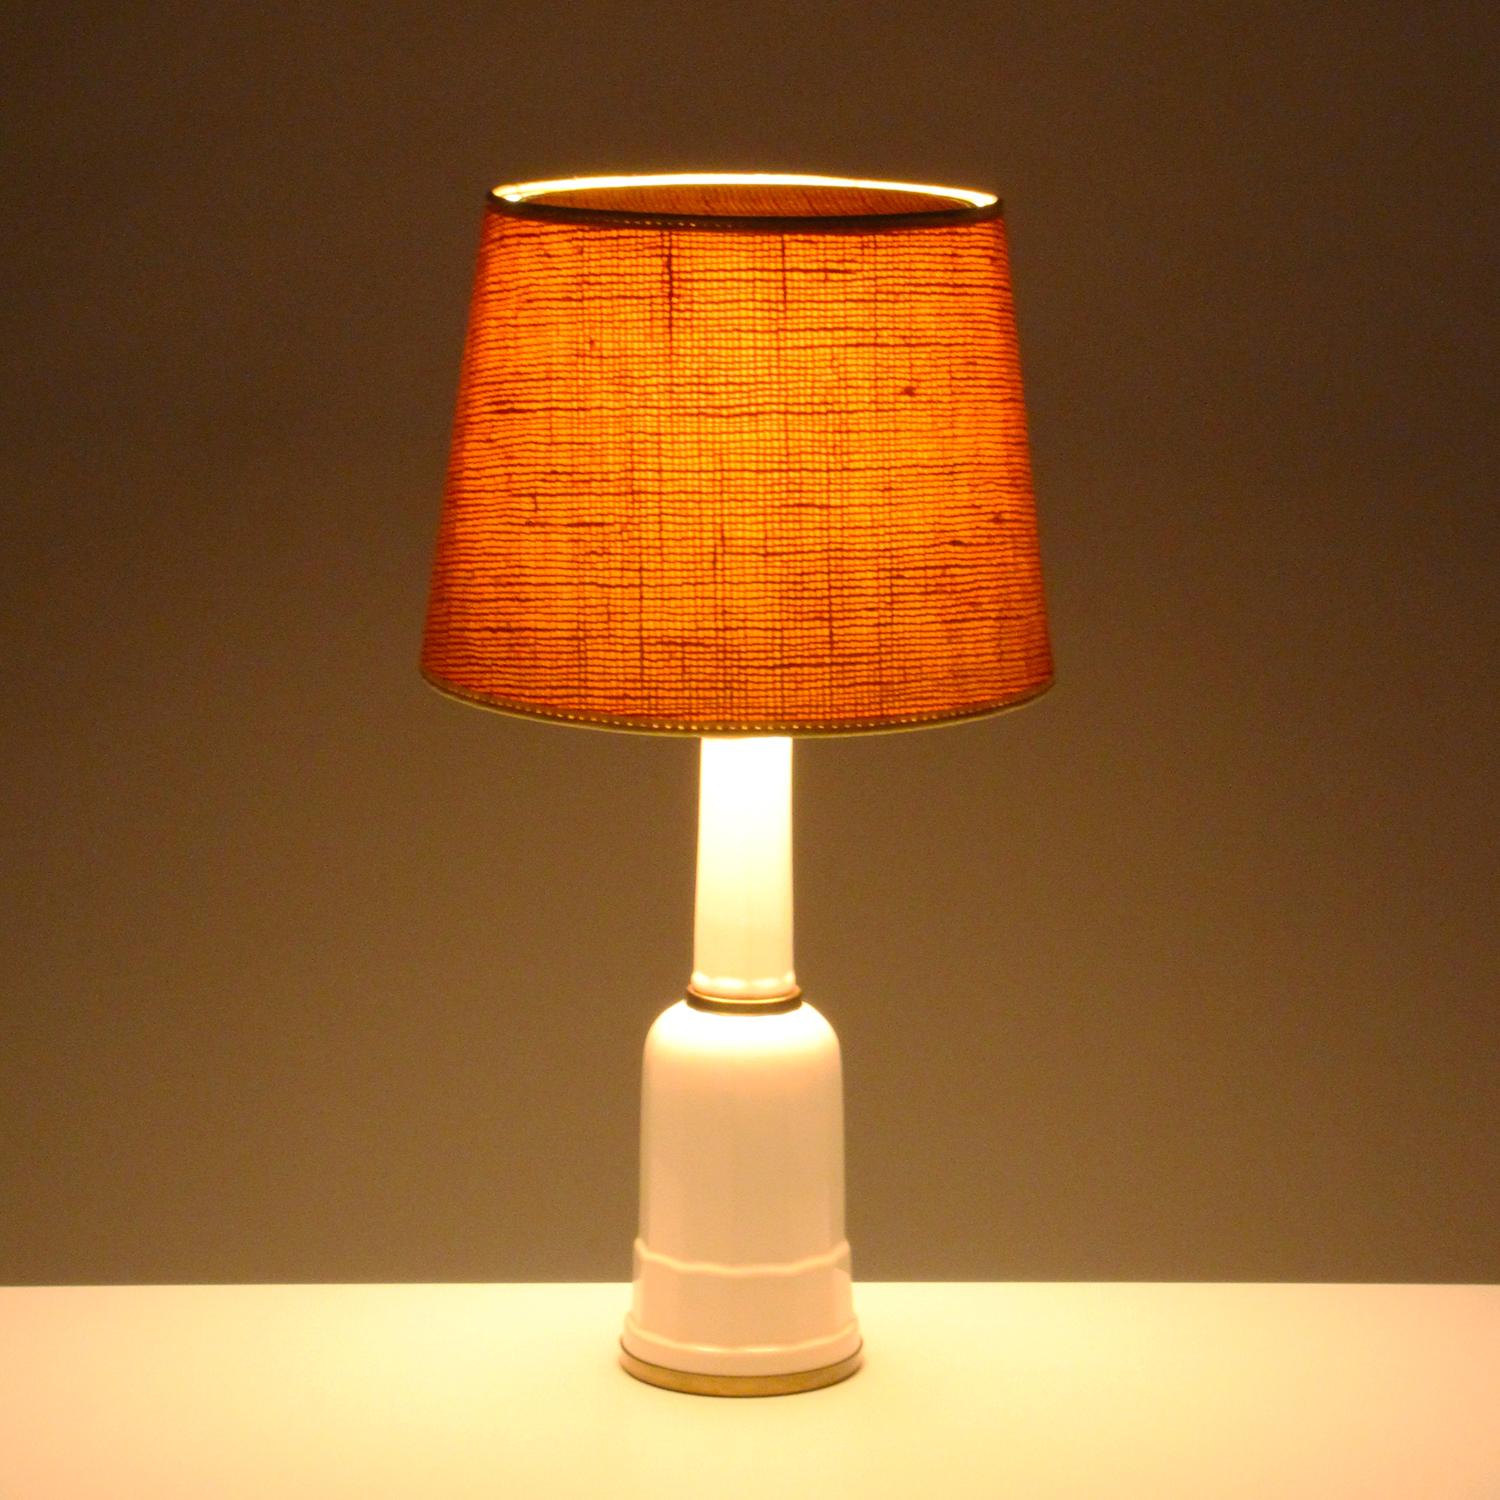 Mid-20th Century HEIBERG TABLE LIGHT by Soholm in the 1960s - with vintage hessian shade included